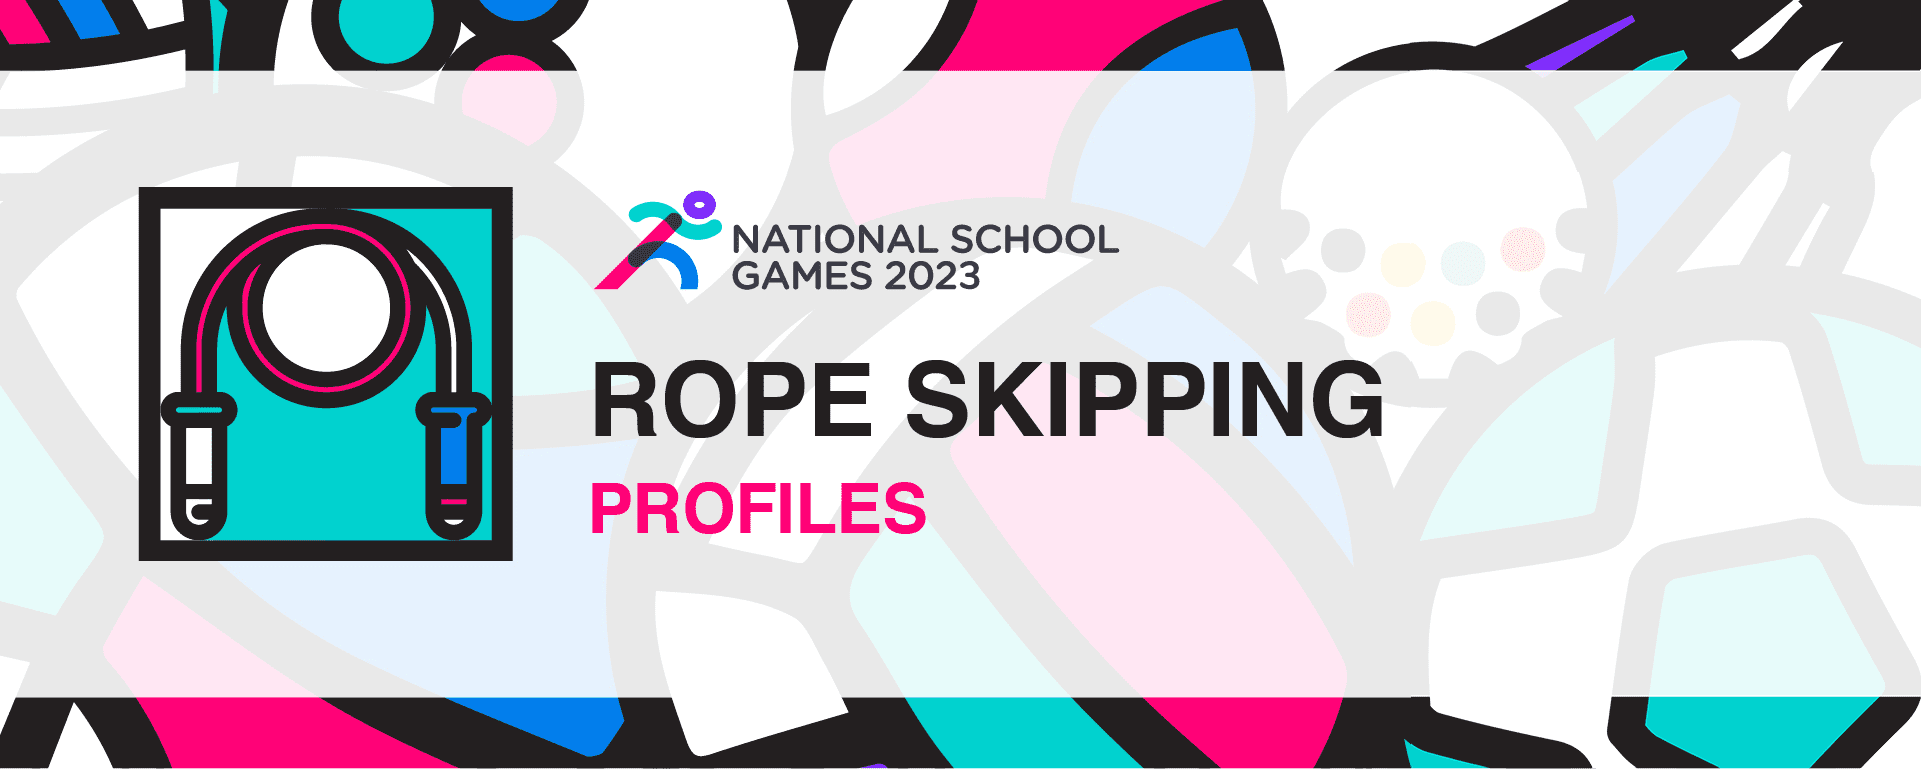 National School Games 2023 | Rope Skipping | Profiles